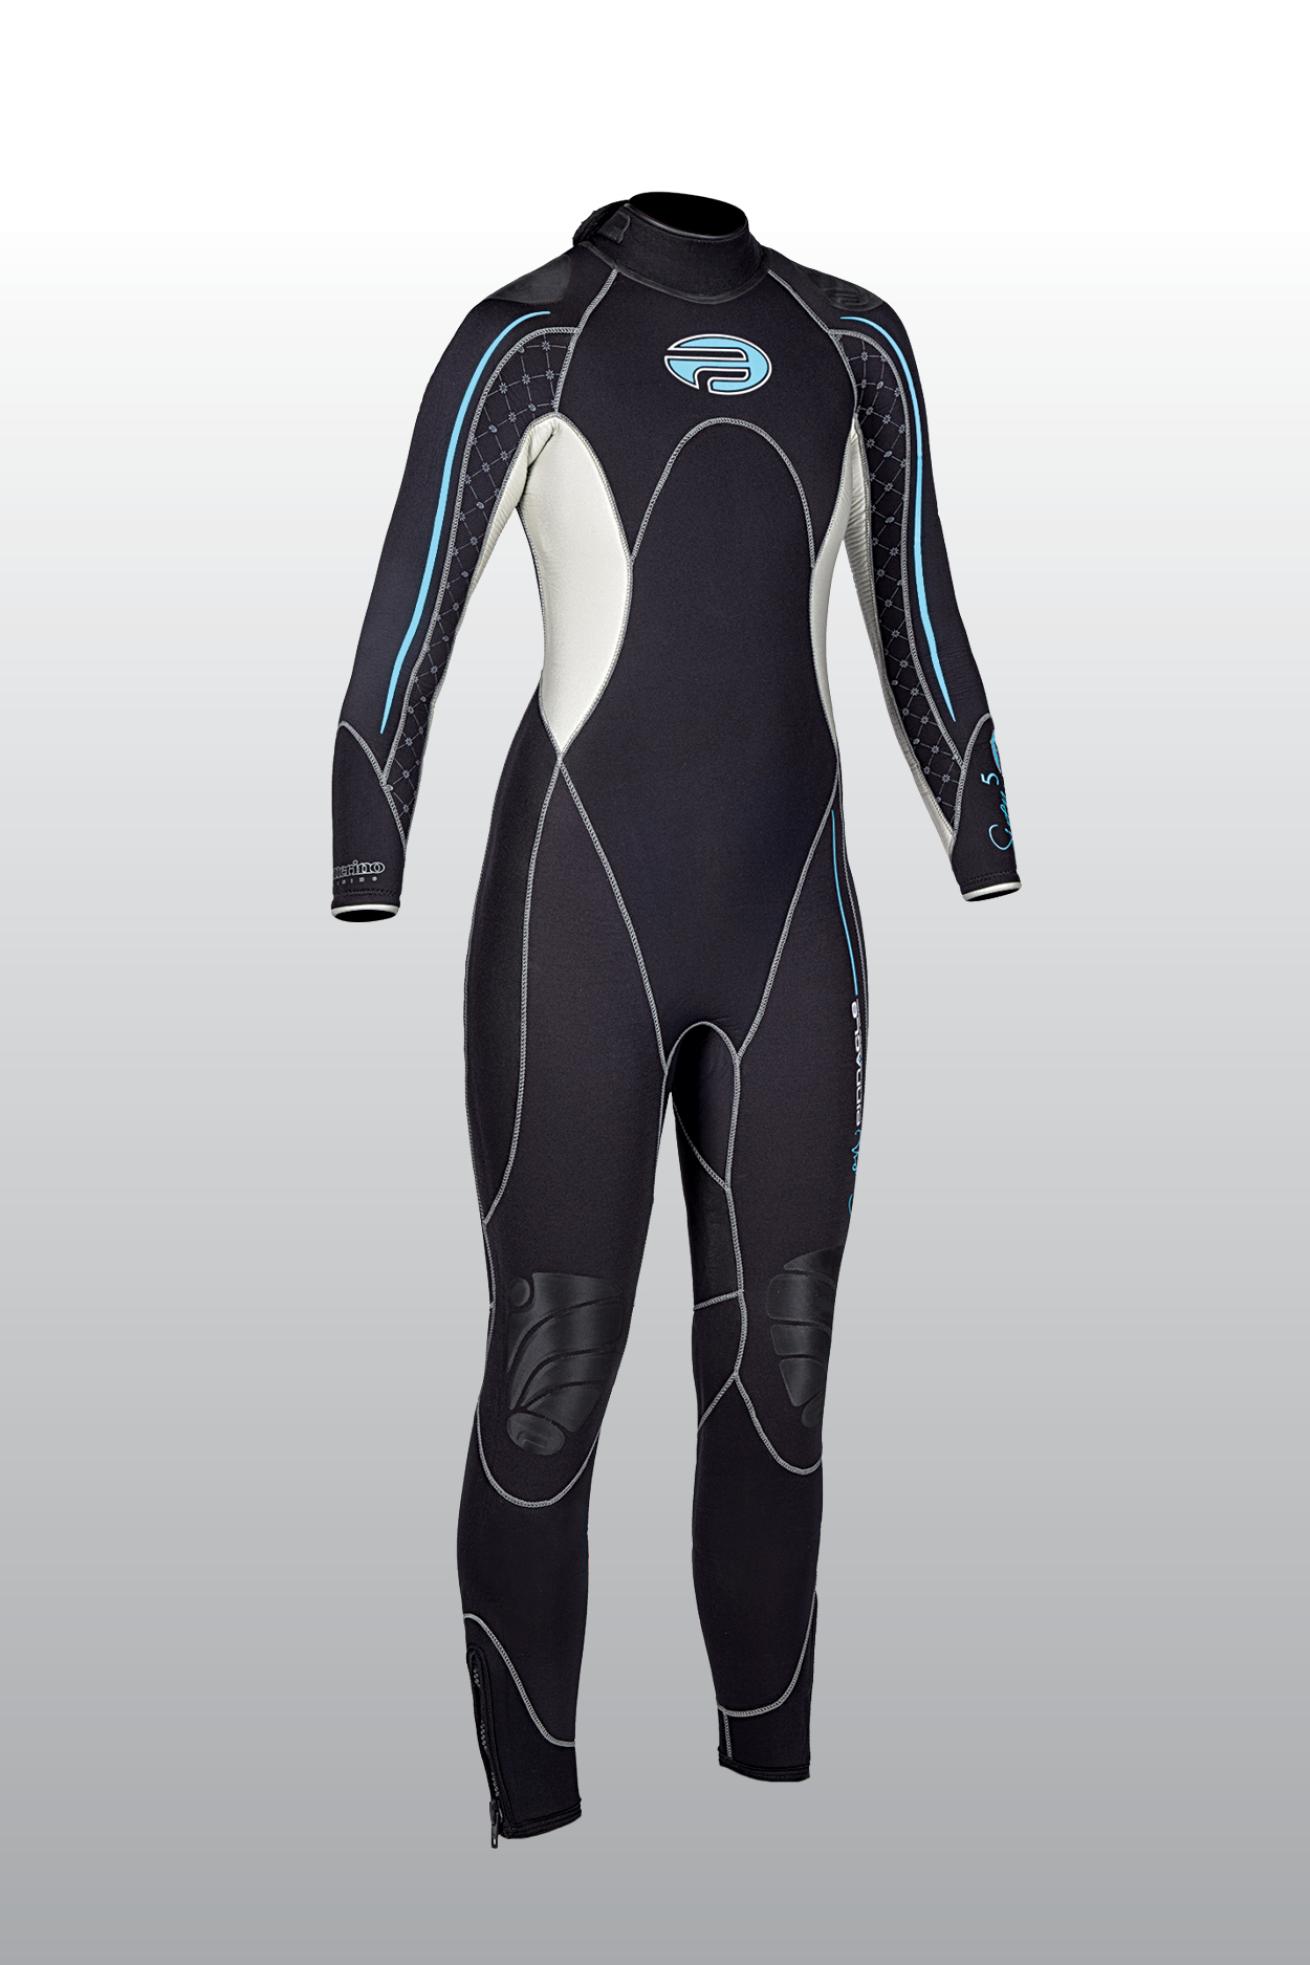 Owntop Wetsuit 5mm Neoprene Diving Suit - Mens Womens Thicken Full Wet  Suit, Front Zip Long Sleeve UPF50+ Keep Warm Swimwear for Scuba Surfing